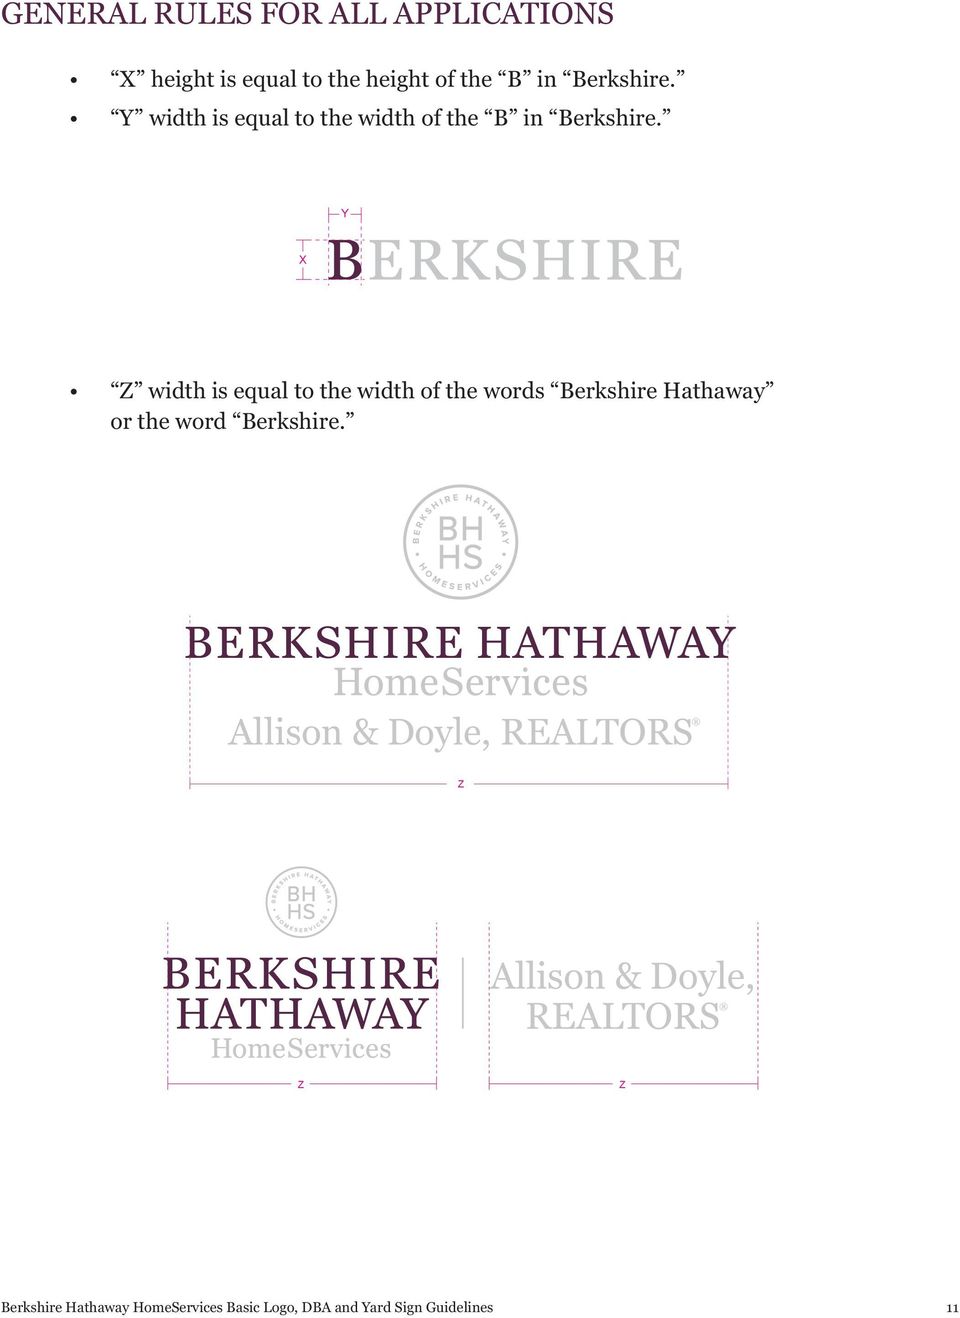 Y Z width is equal to the width of the words Berkshire Hathaway or the word